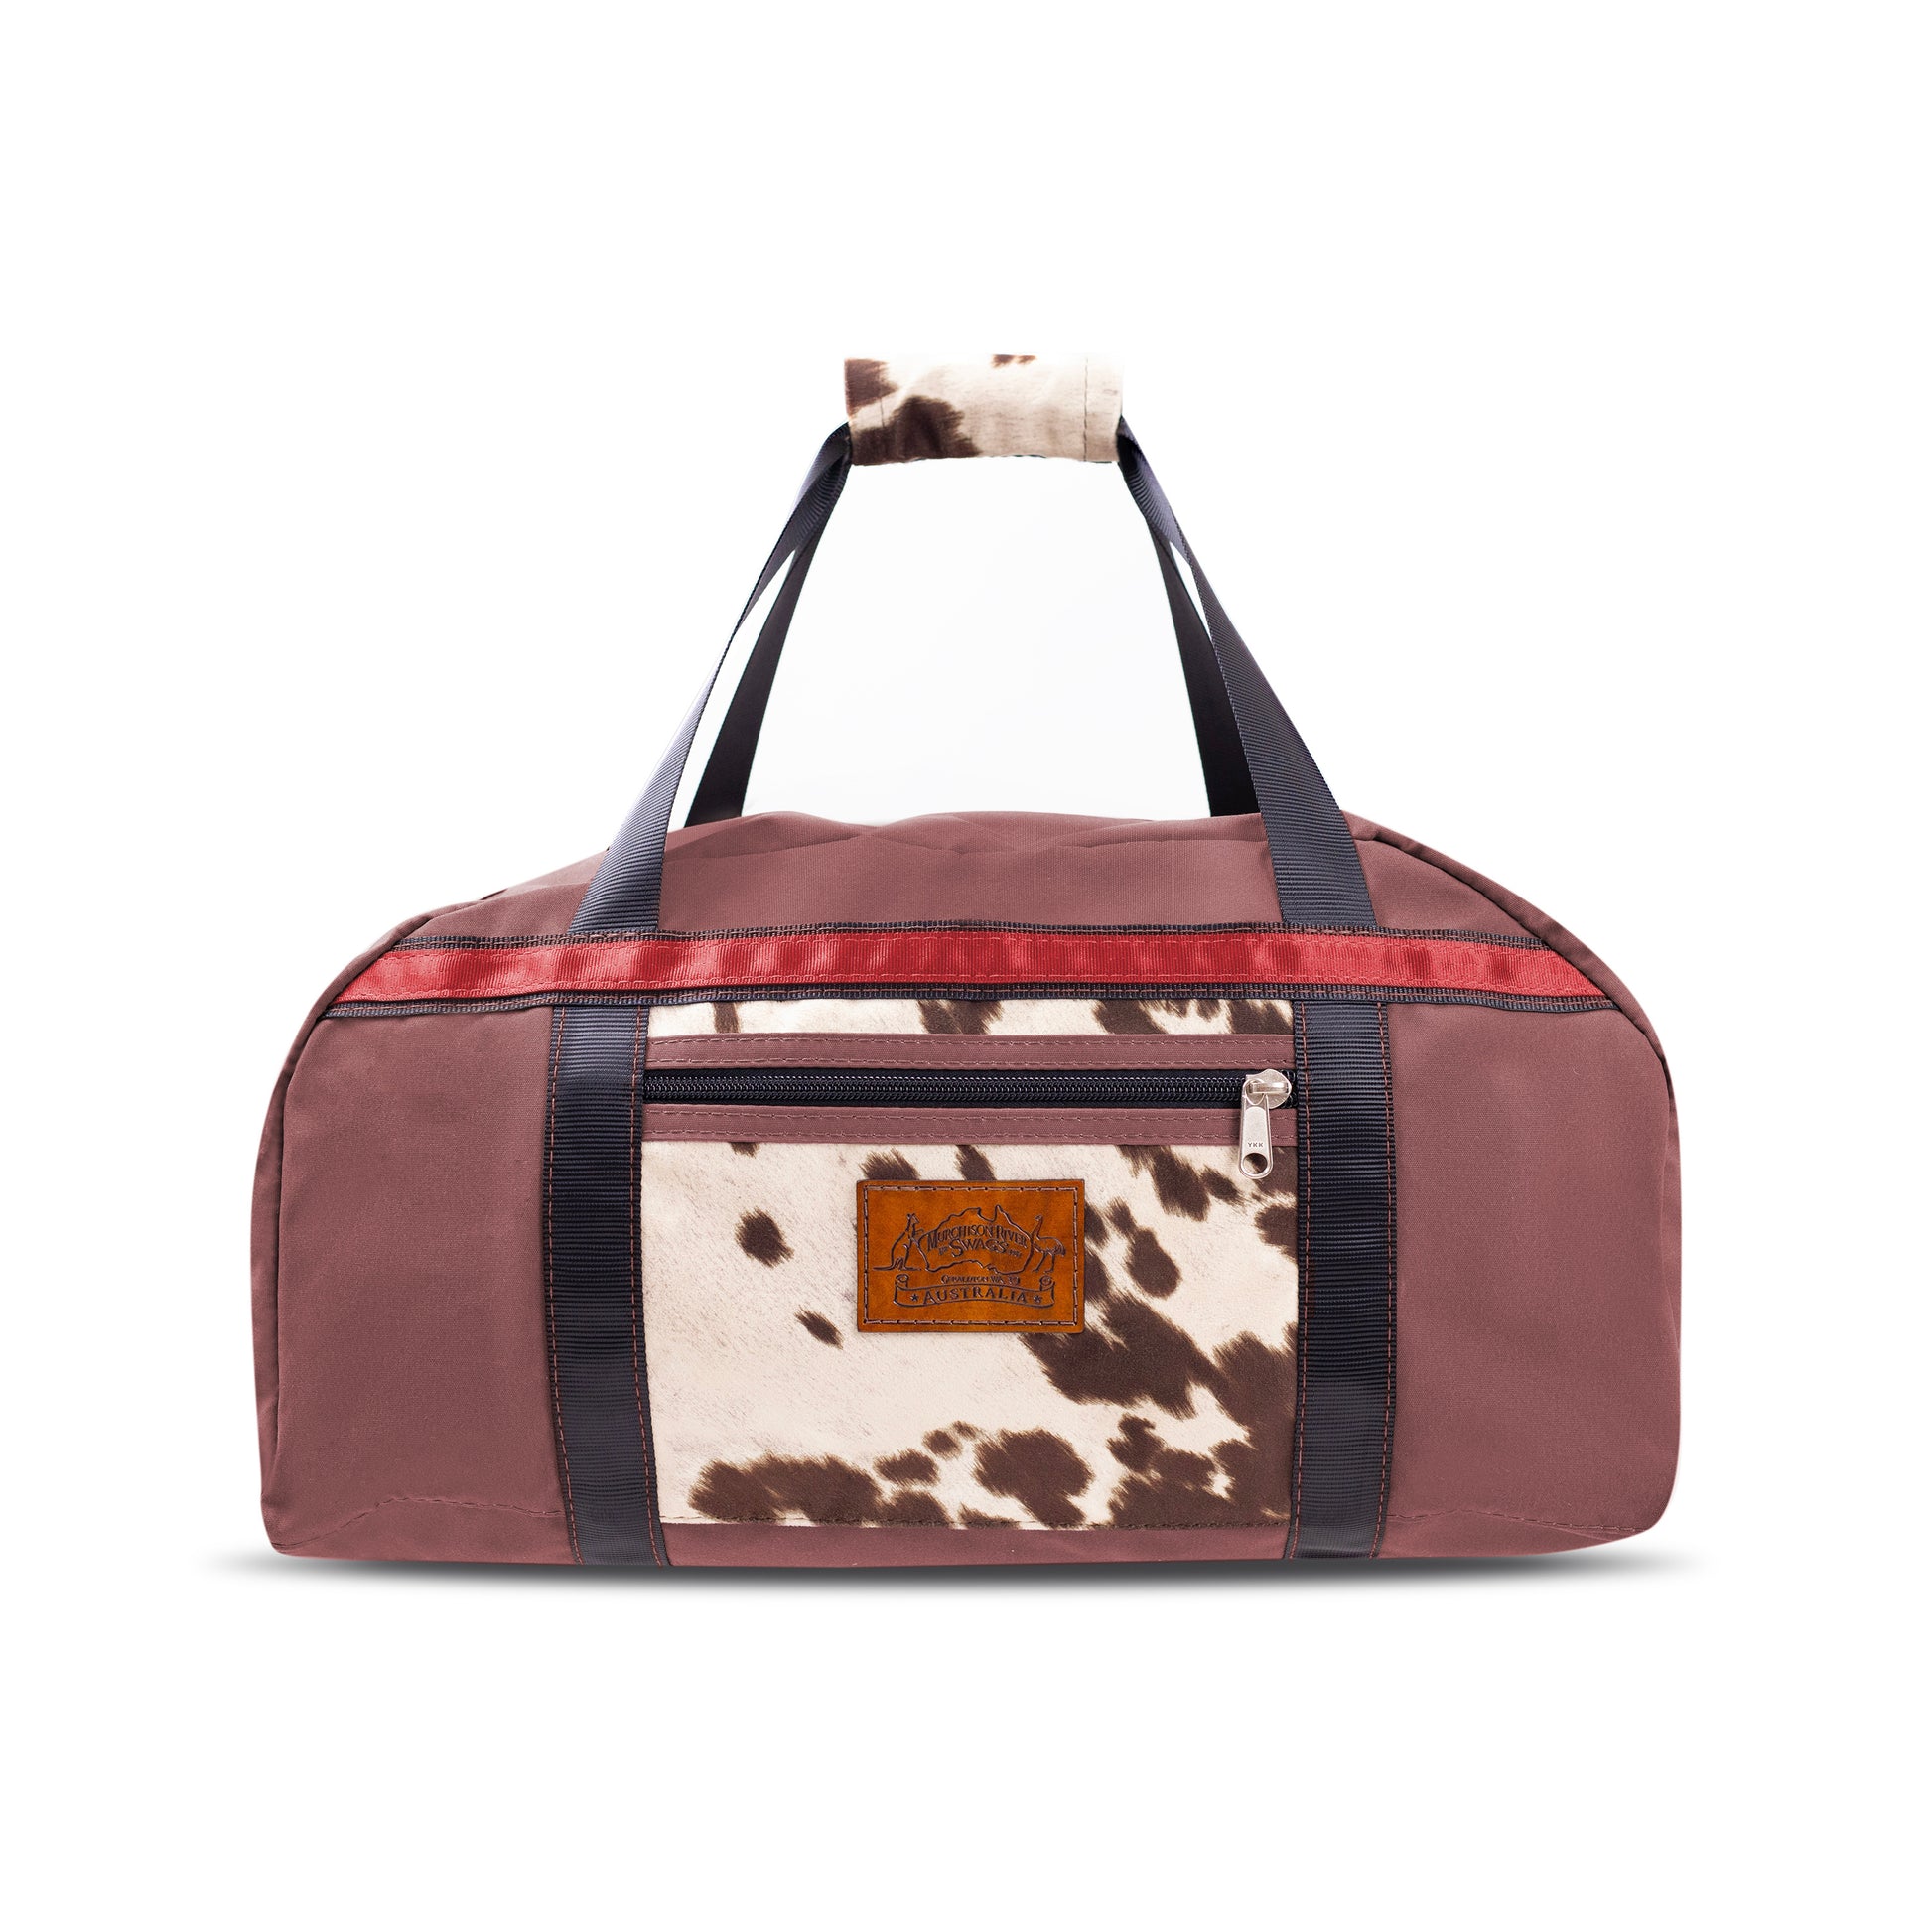 Burgundy Overnight Canvas Bag with limited edition cow print fabric.